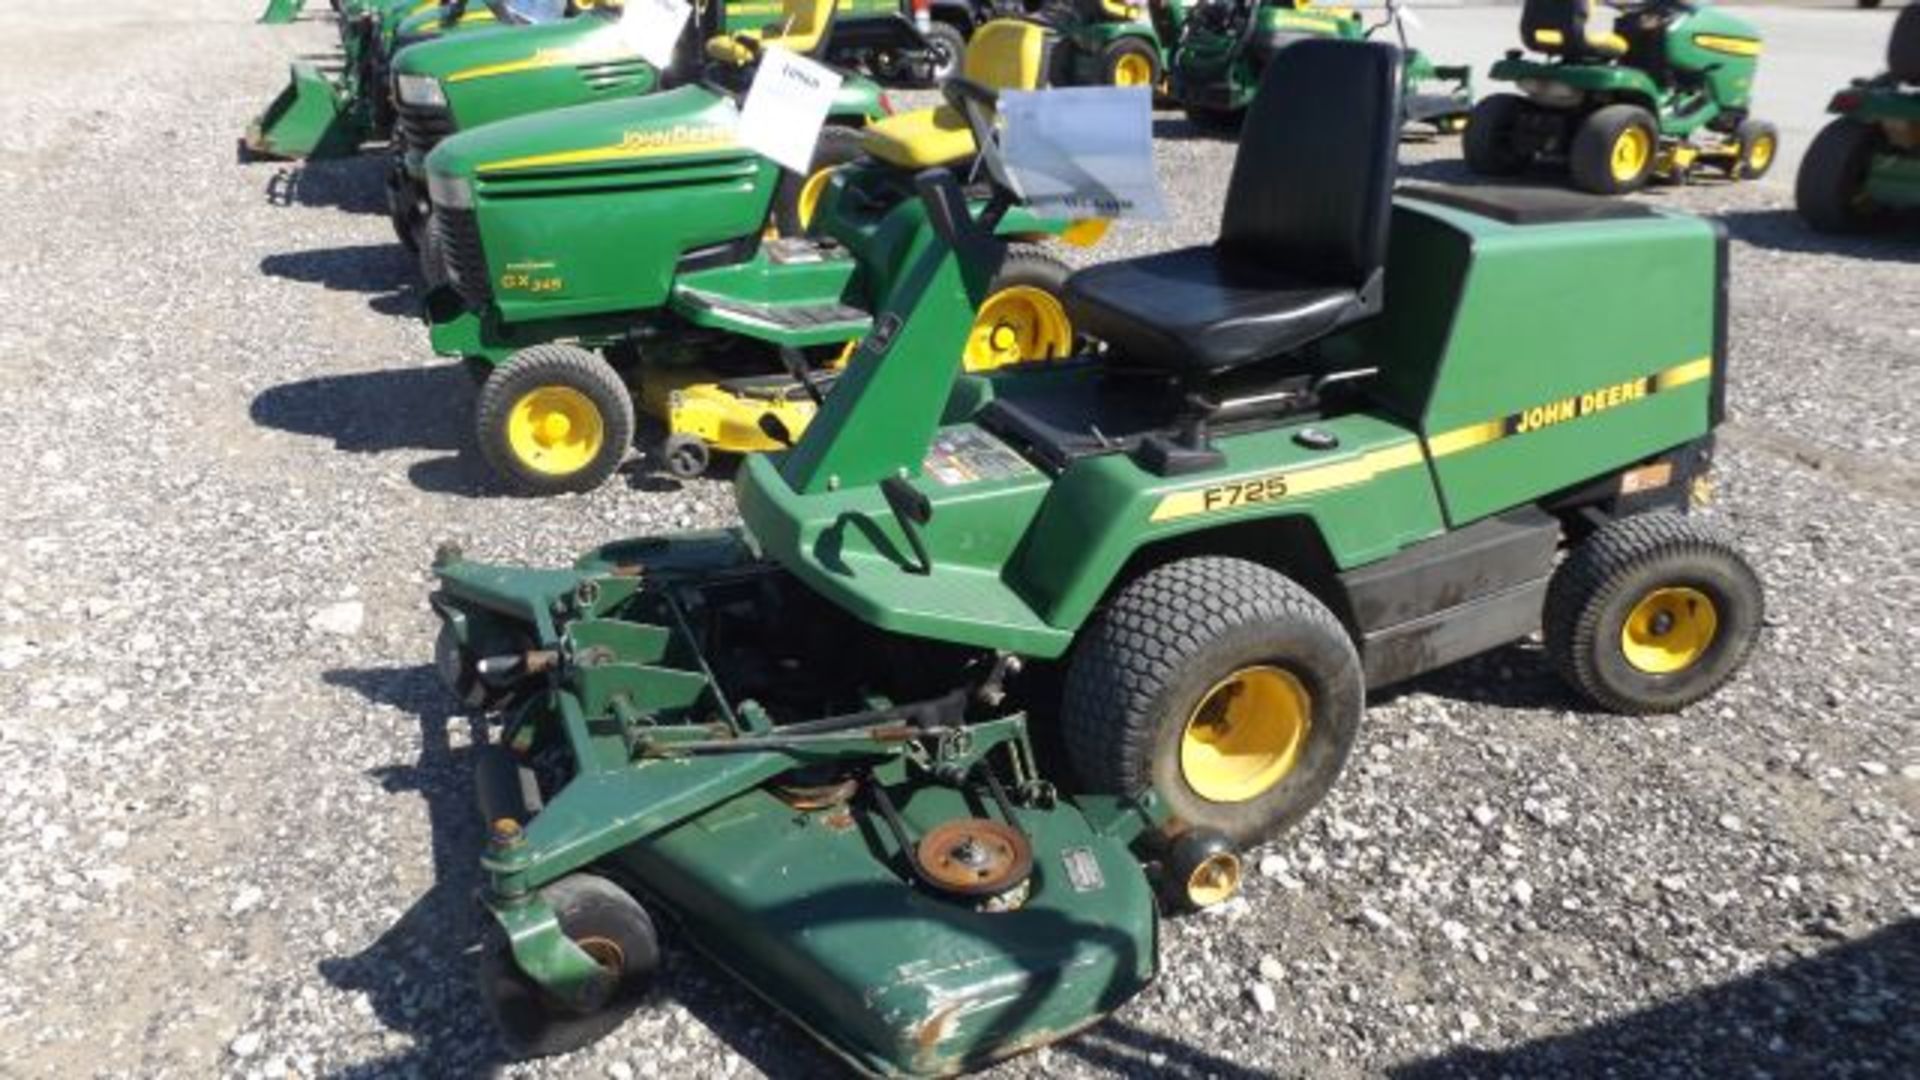 1998 JD F725 Mower #111891, 3560 hrs, 50" Front Mounted Deck, 20hp Kawasaki, Water Cooled, V-Twin,